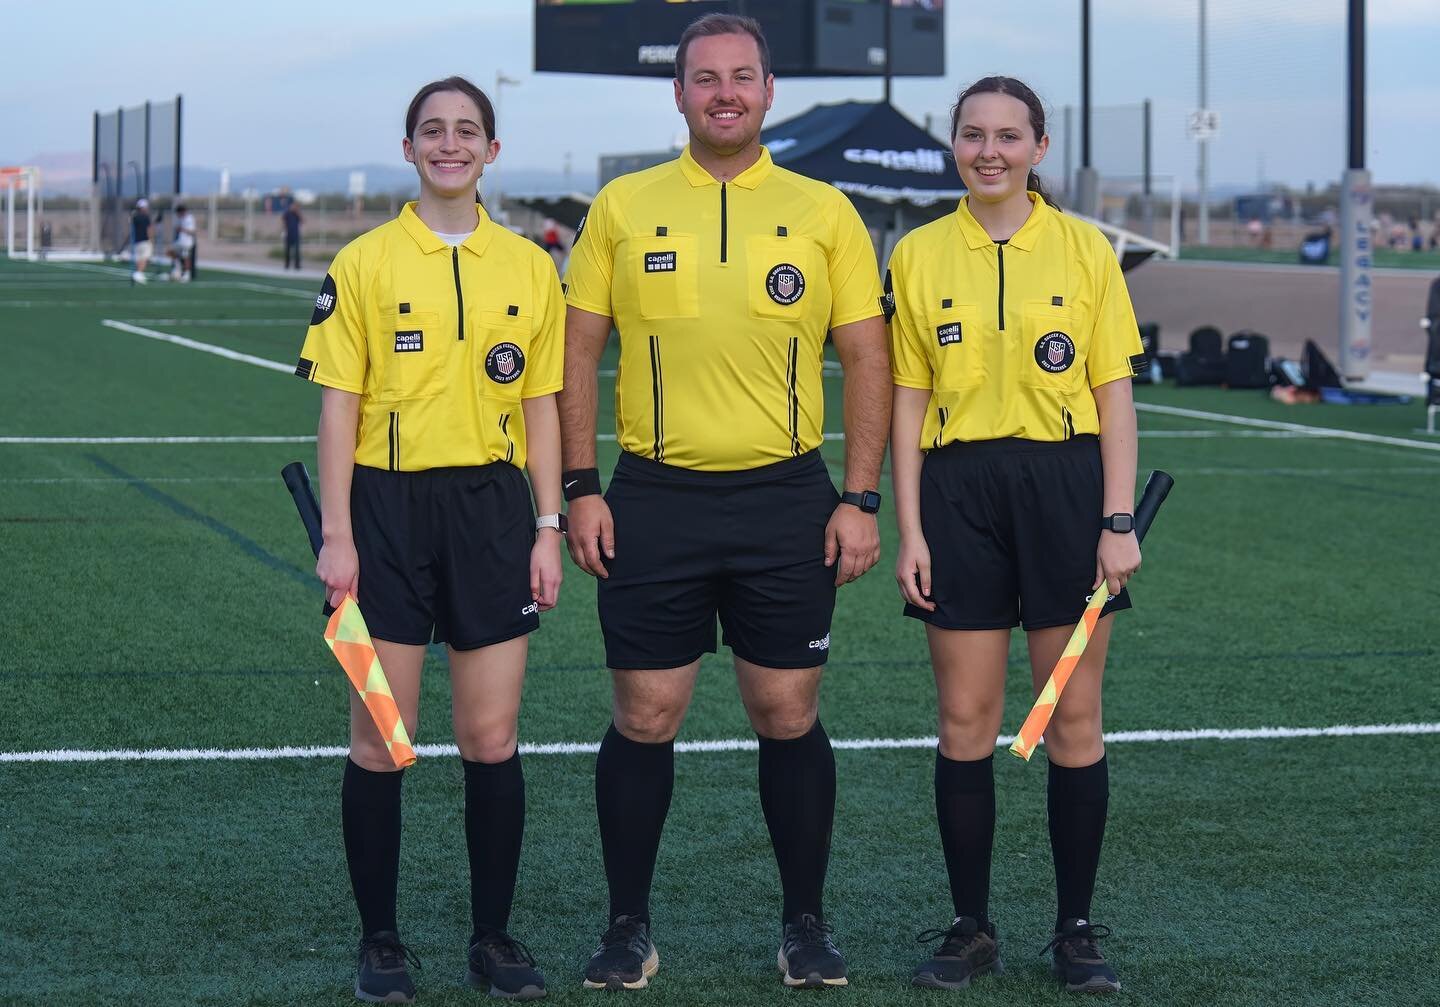 Last weekend @capellisport hosted the Capelli Cup in Arizona and it was great seeing all our referees in action! #AZReferees #CapelliCup
📸: Michelle Golowatsch